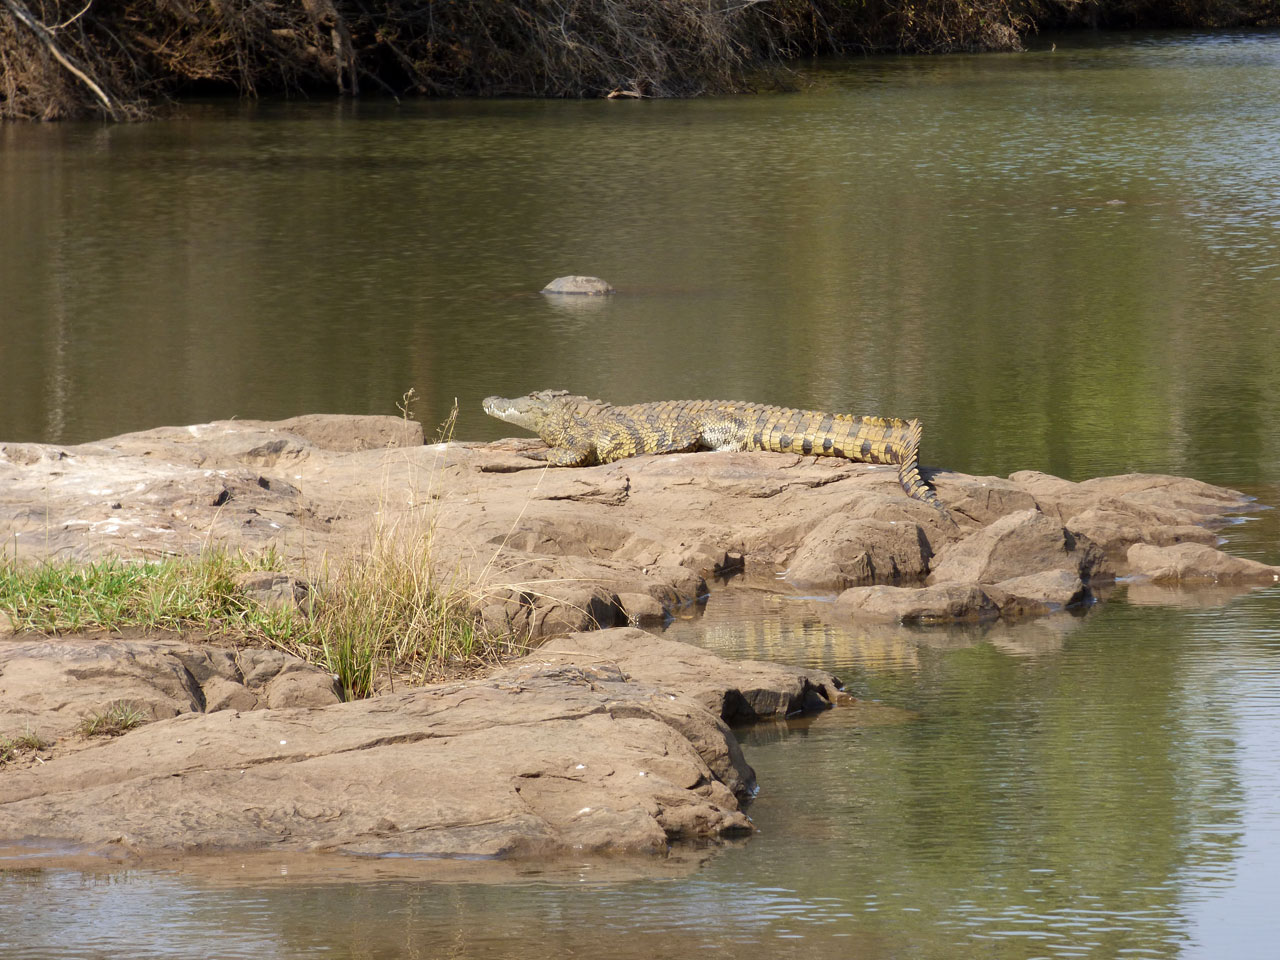 Crocodile by the Madikwe River, South Africa